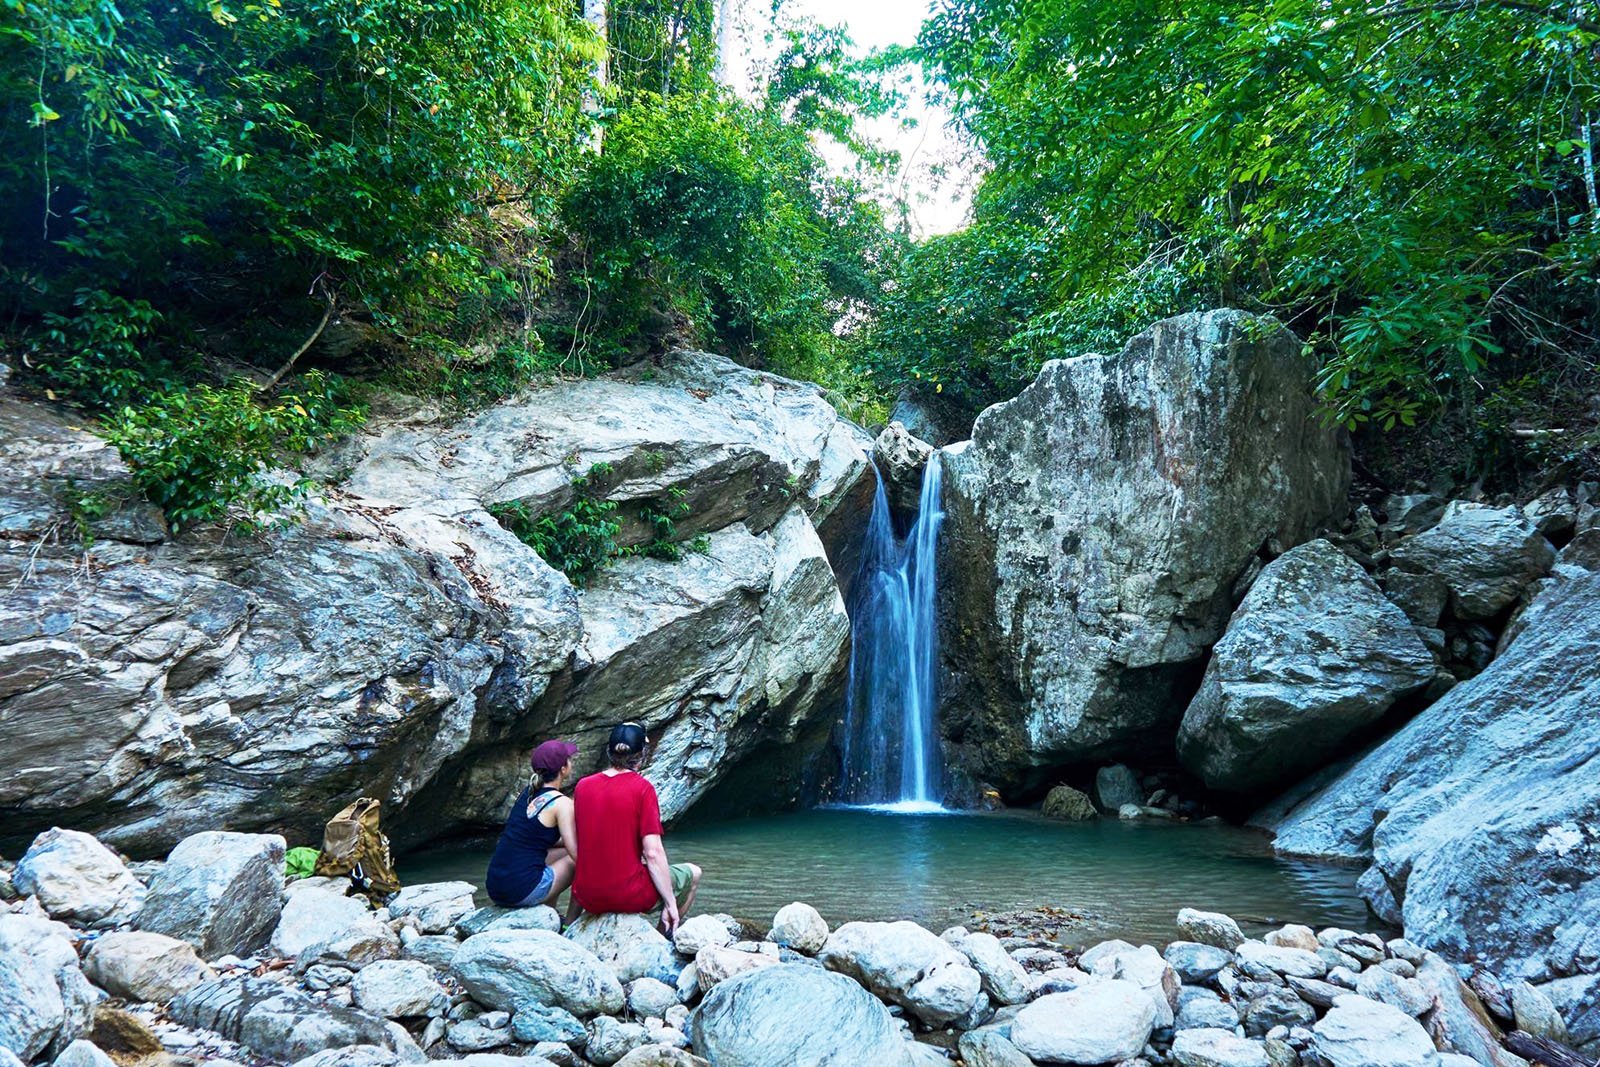 How to reach the Talipanan Falls on Mindoro